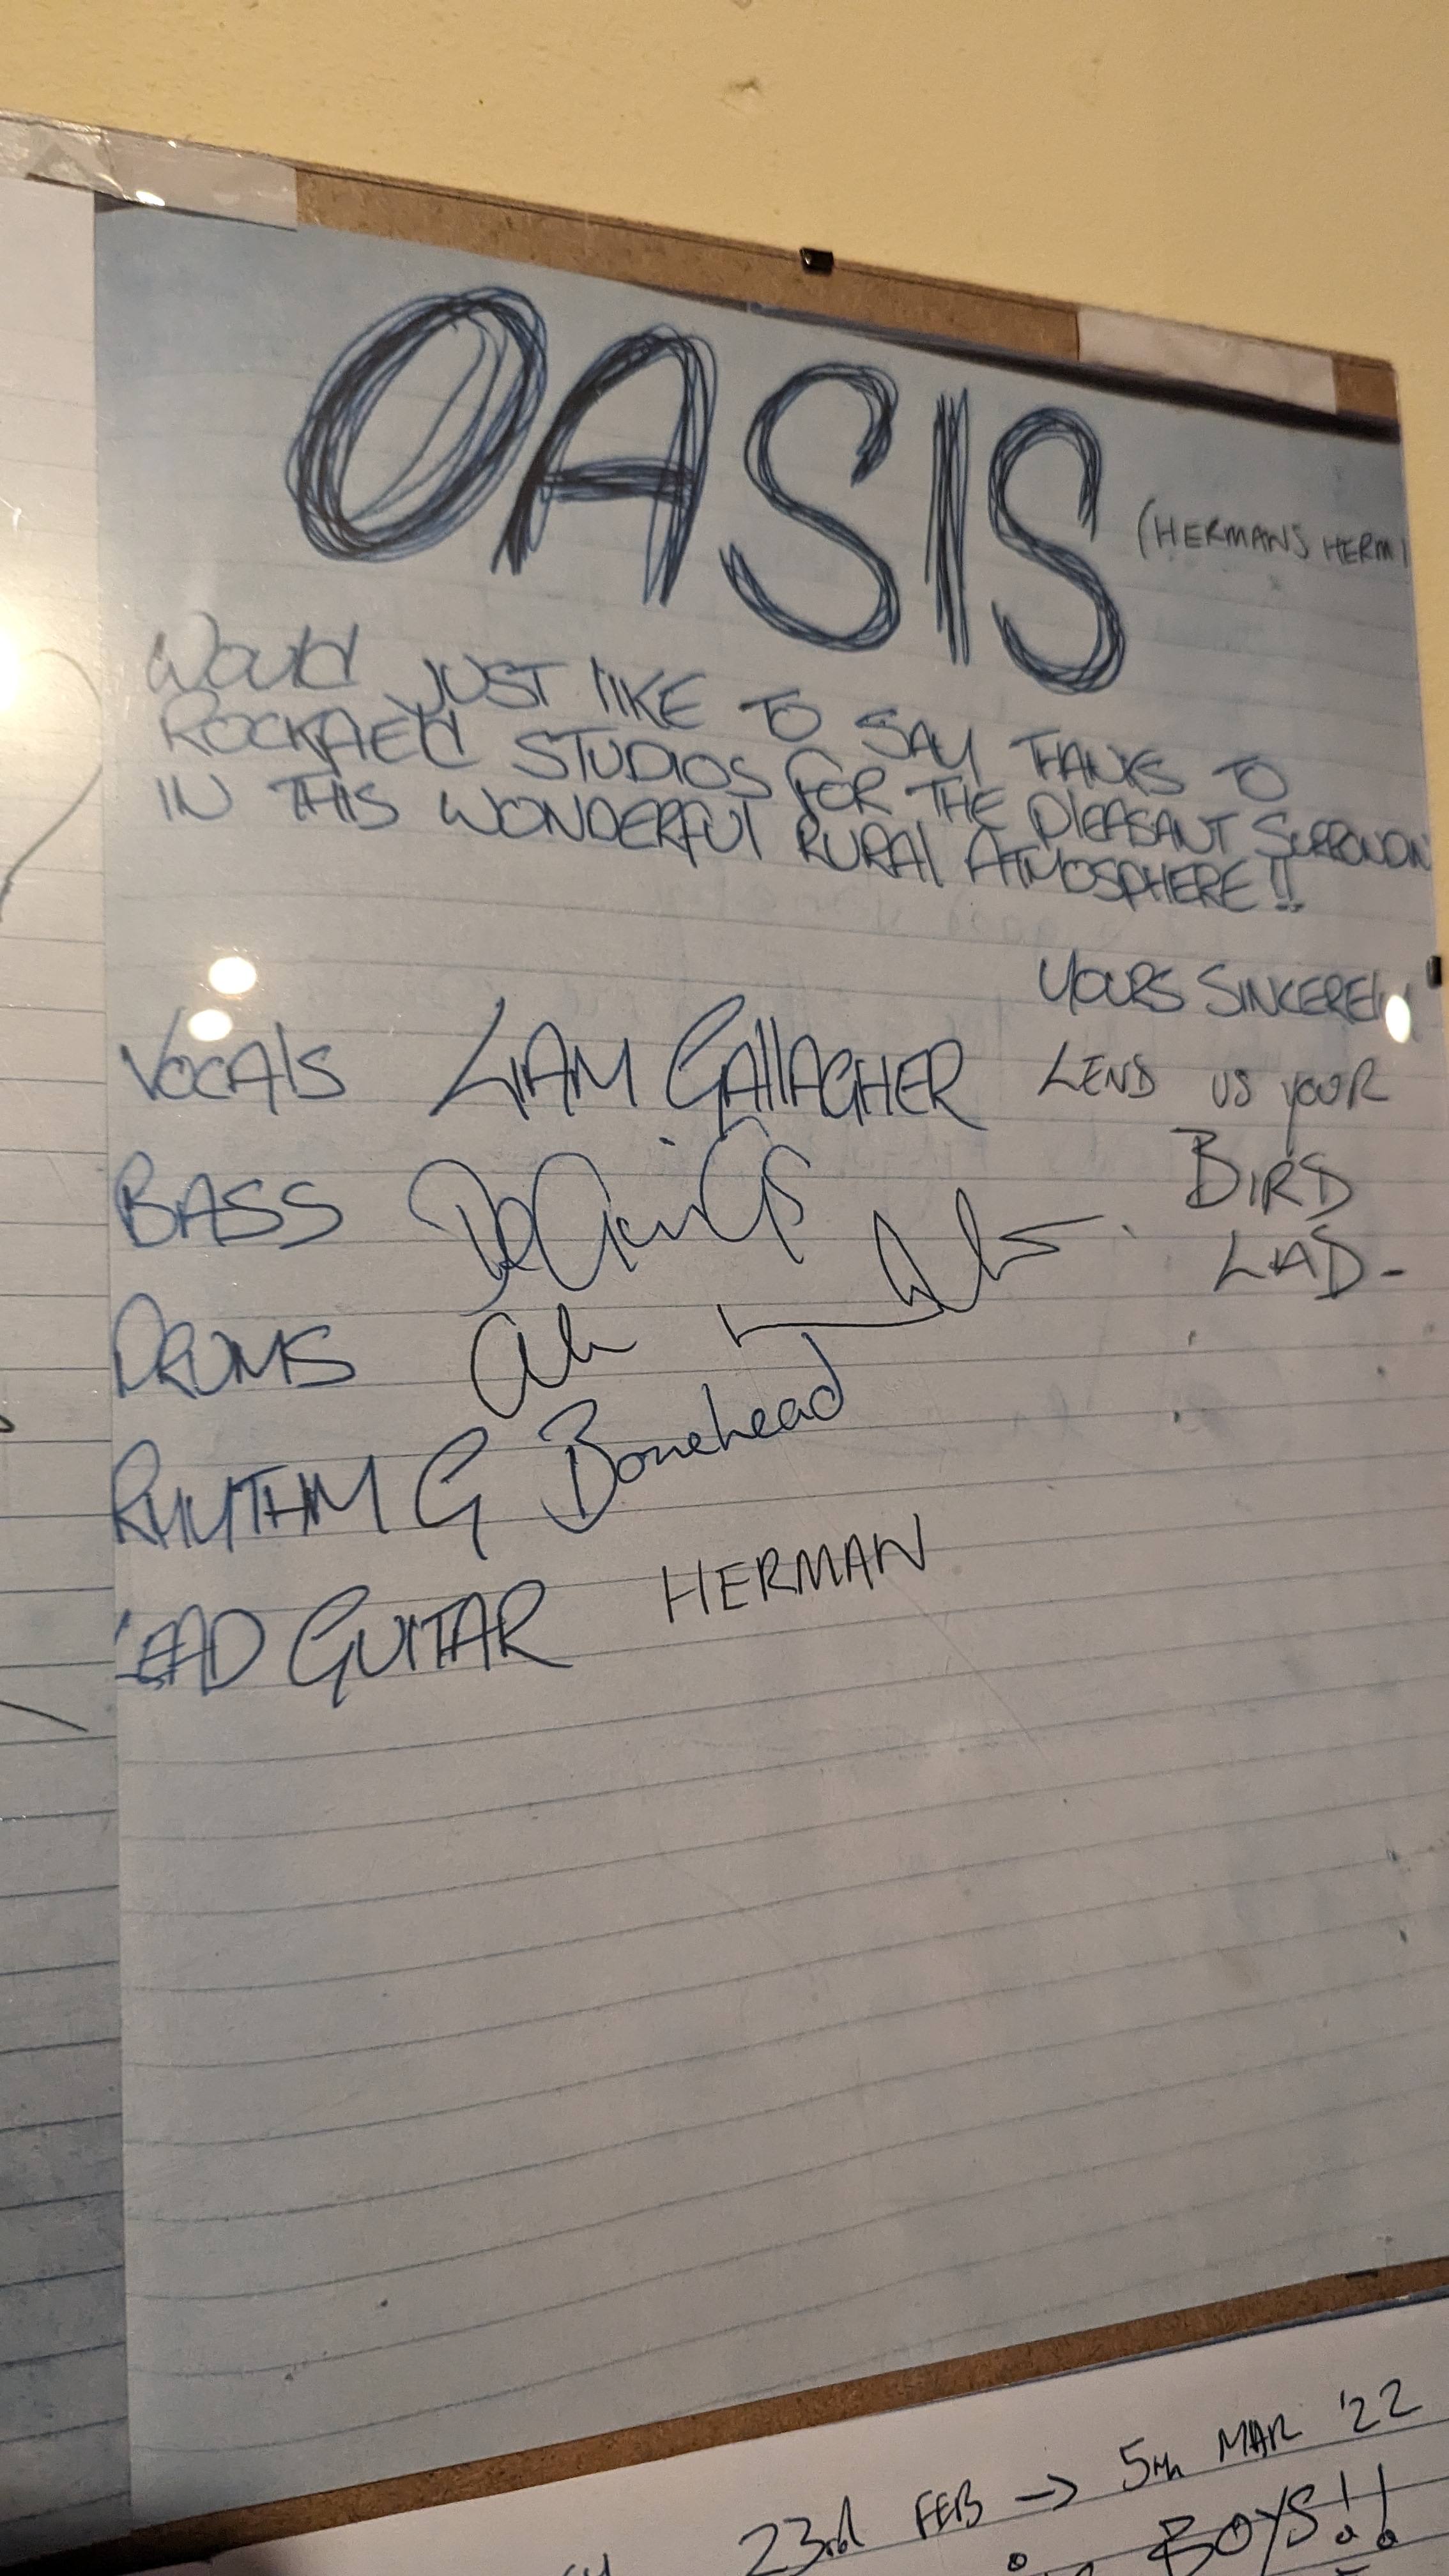 Oasis 'thank you' note on the wonder wall of Rockfield Studios